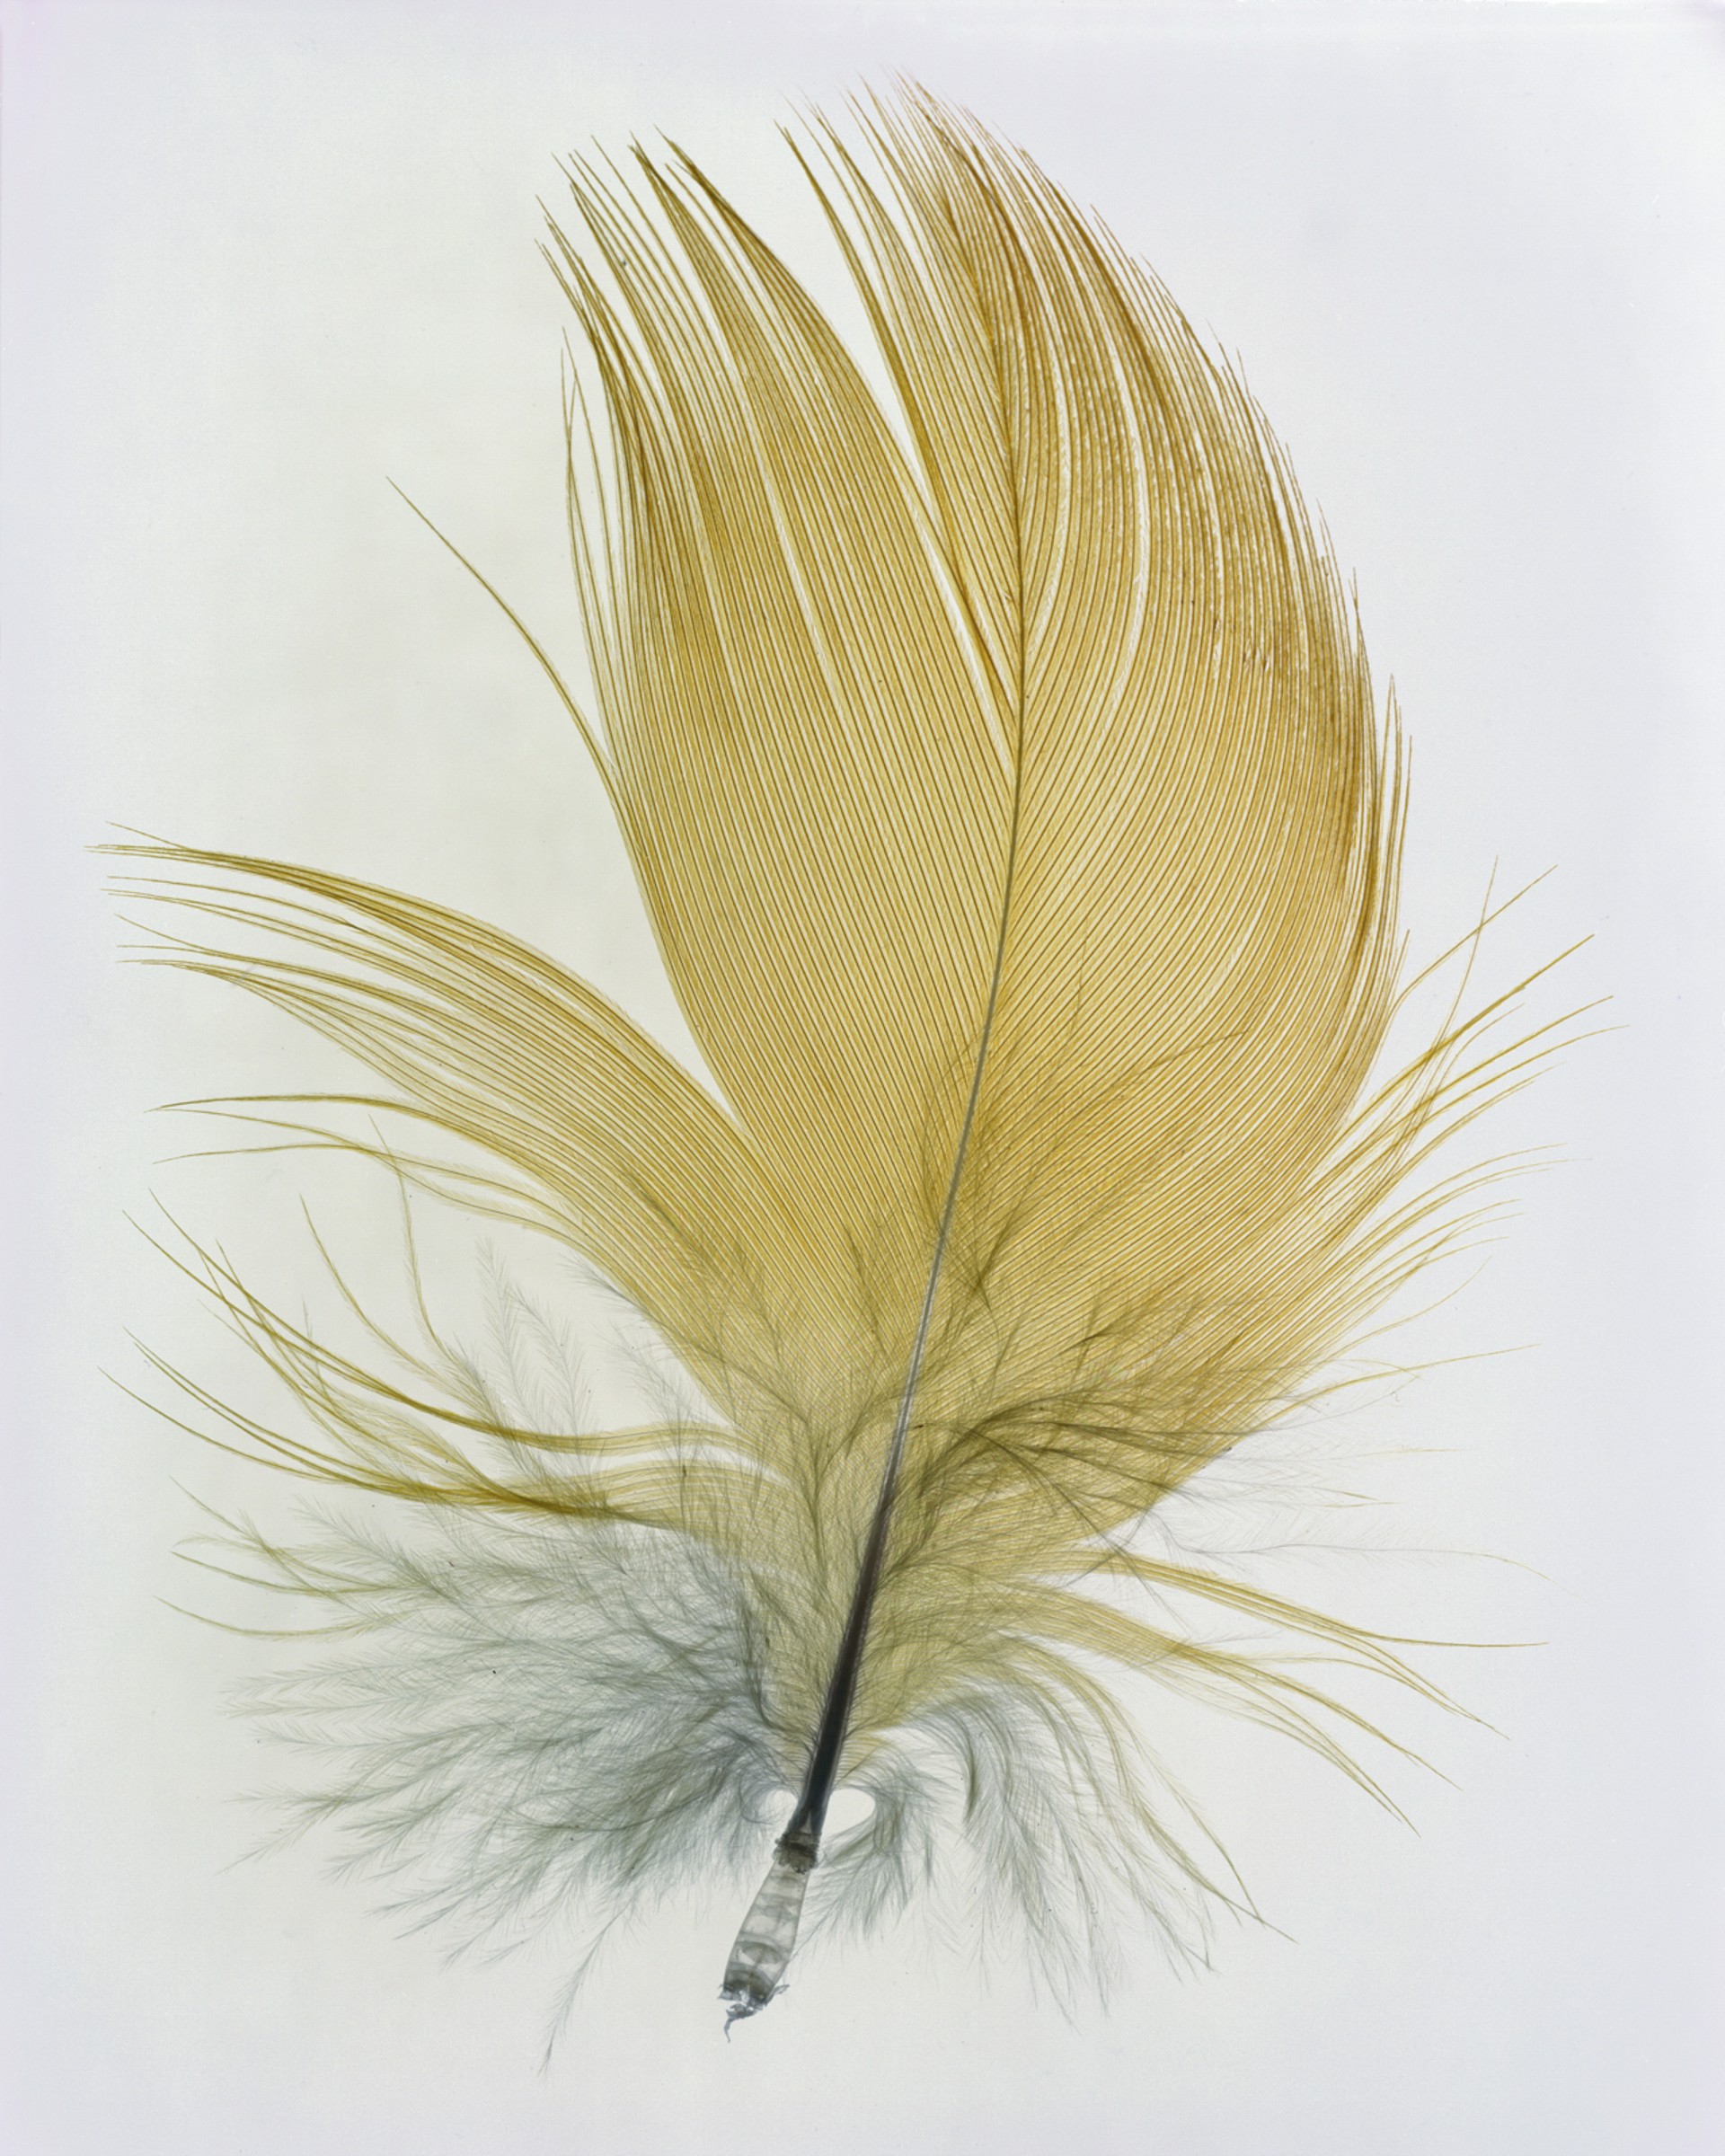 Feather Study #4 by Taylor Curry